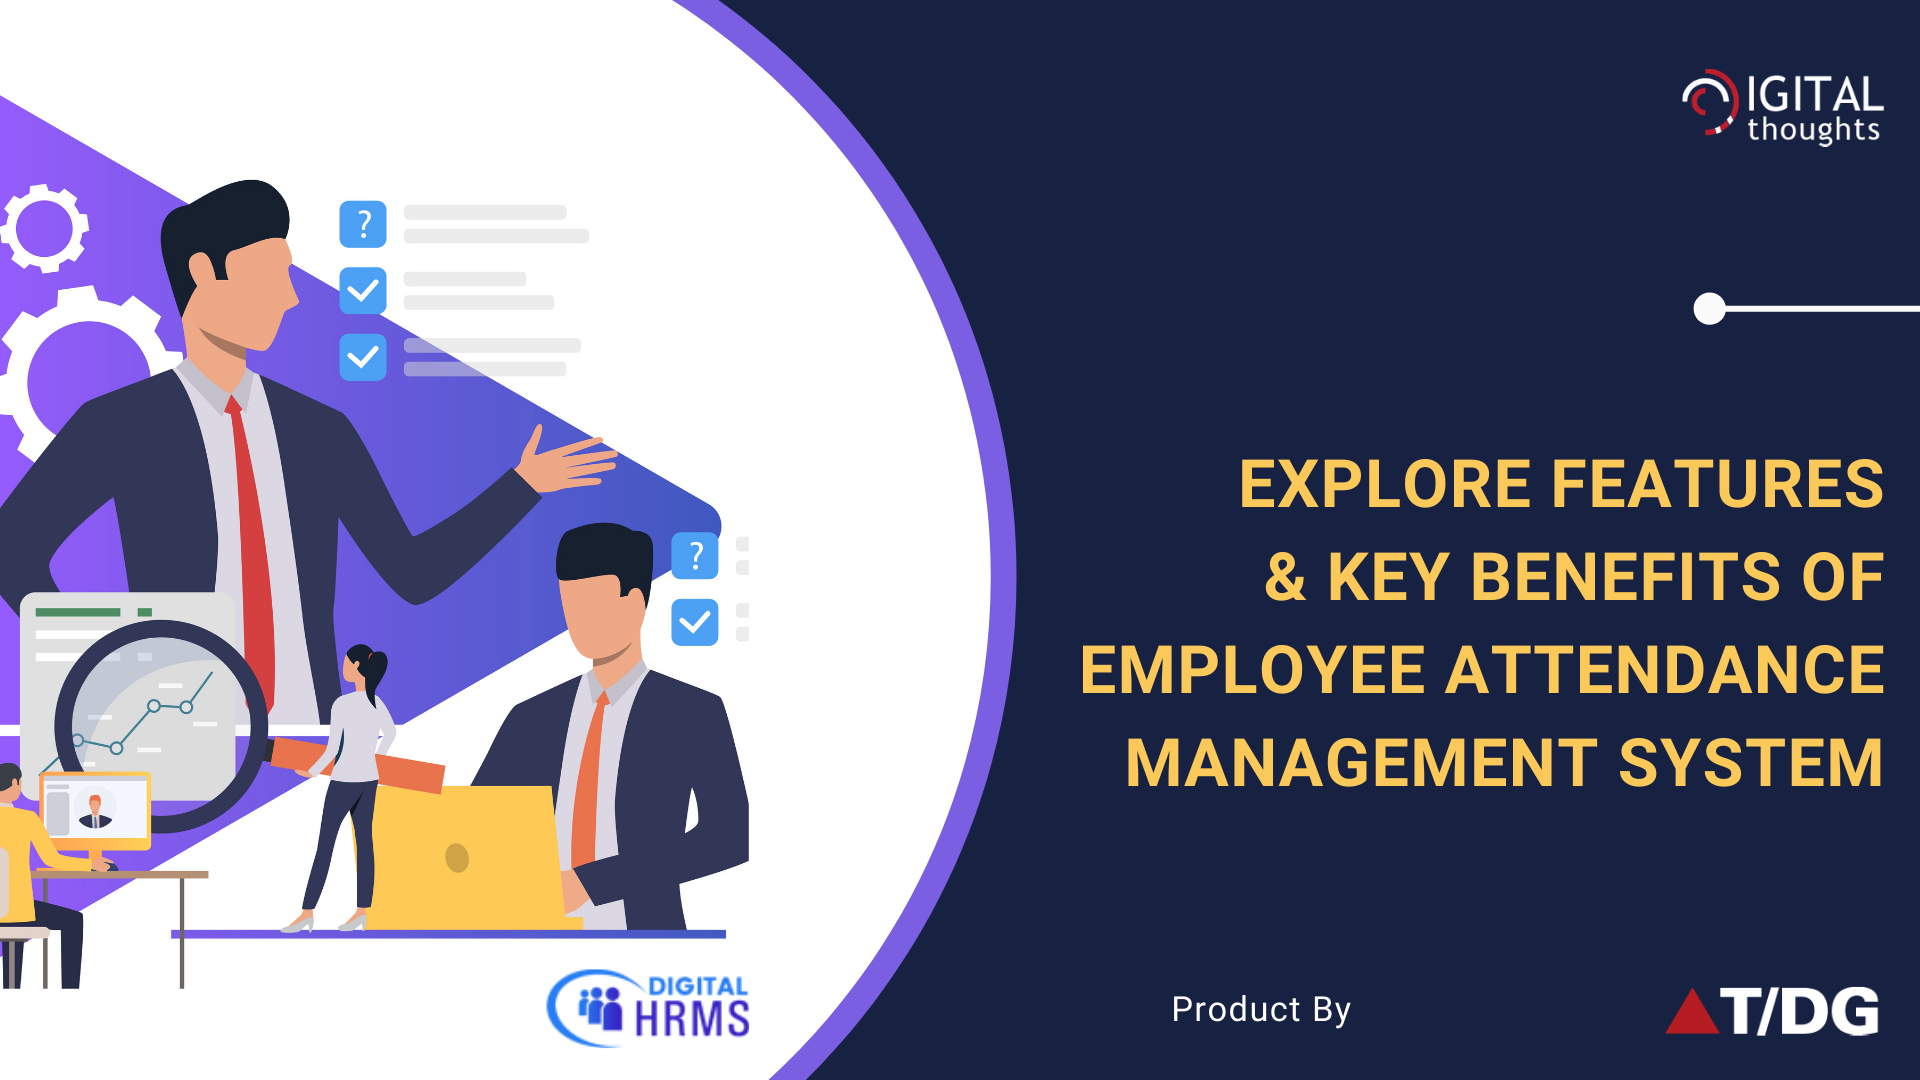 Explore Features and Benefits of Employee Attendance Management with Digital HRMS 